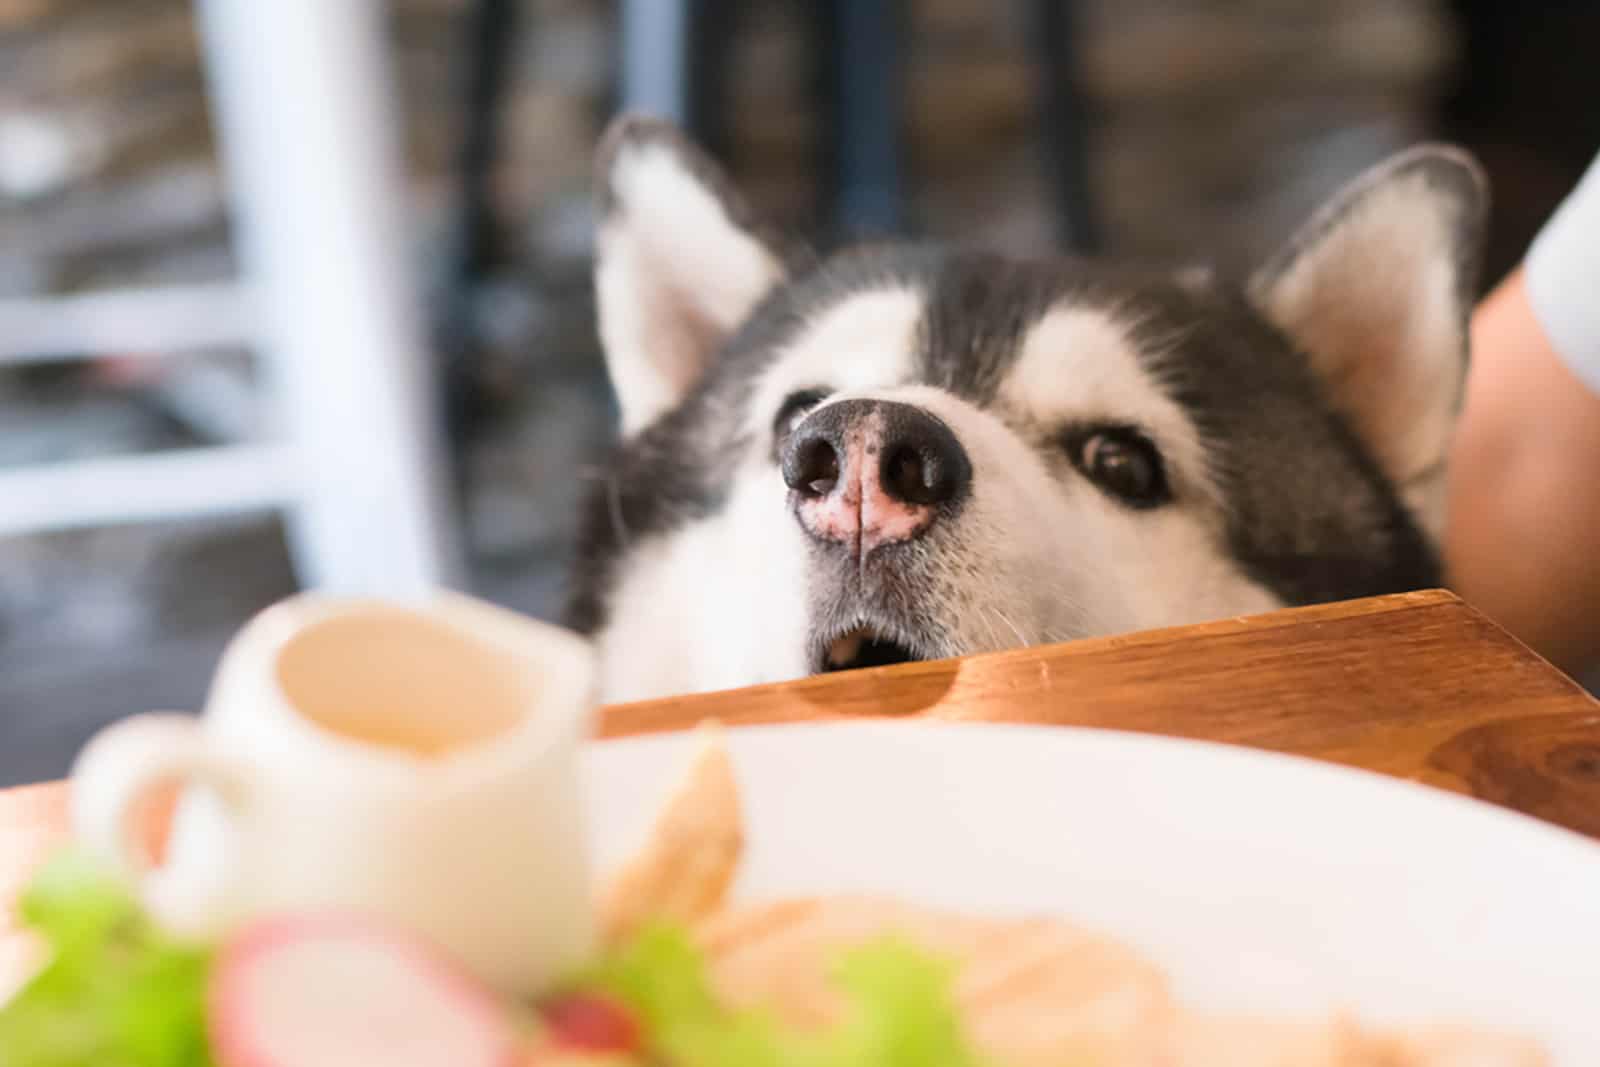 siberian husky sniff food from the table